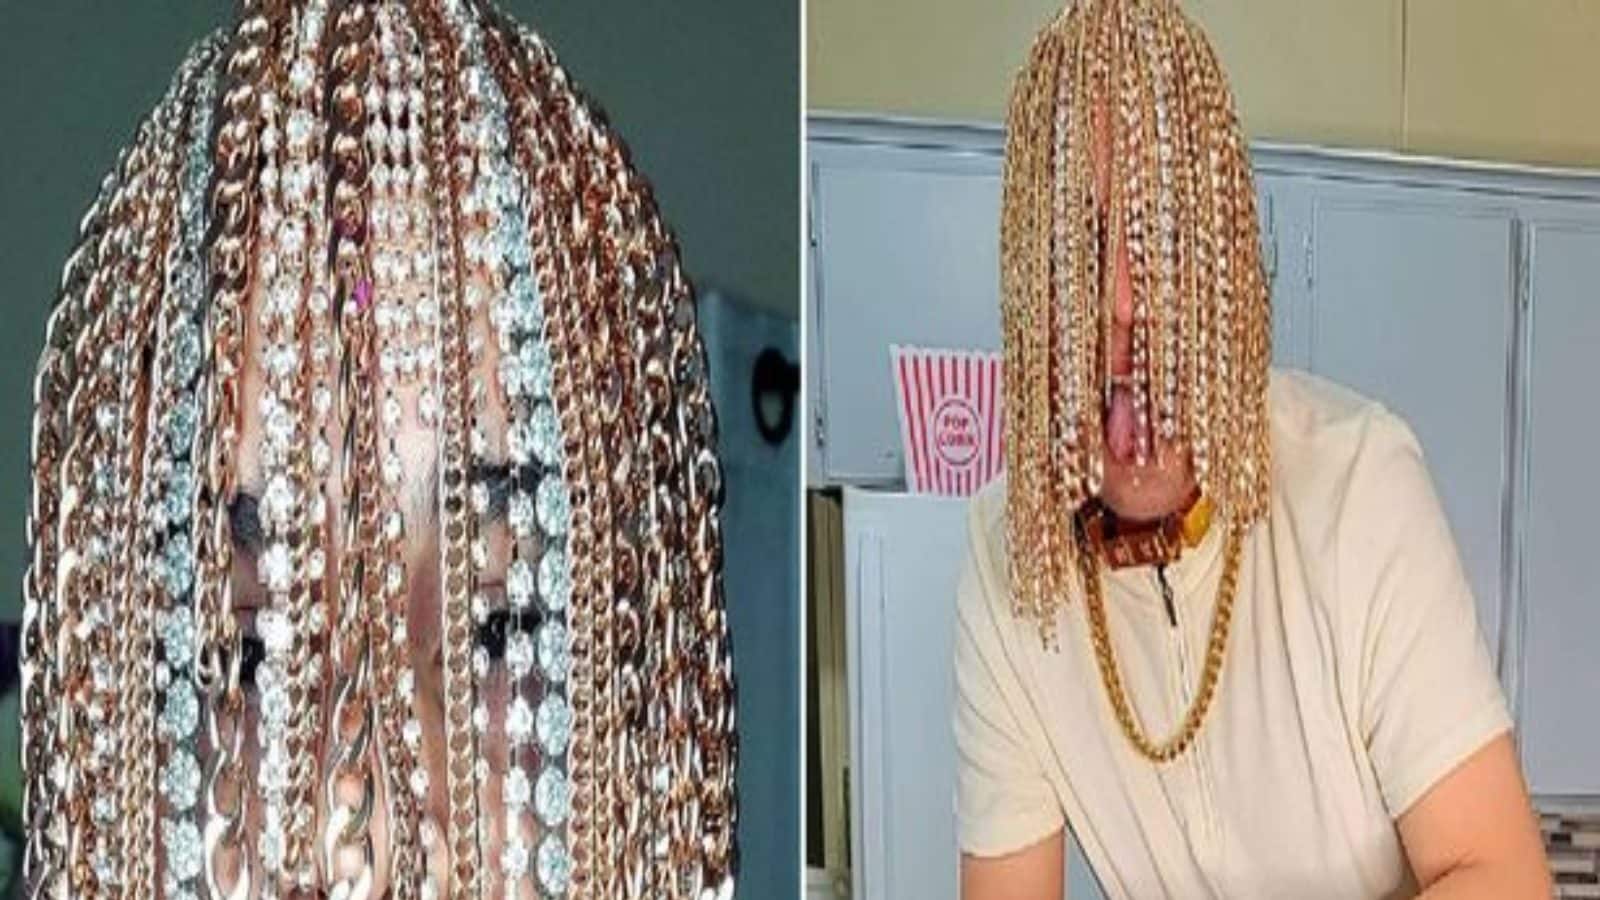 Rapper Dan Sur gets gold chain hooks surgically implanted into scalp   newscomau  Australias leading news site